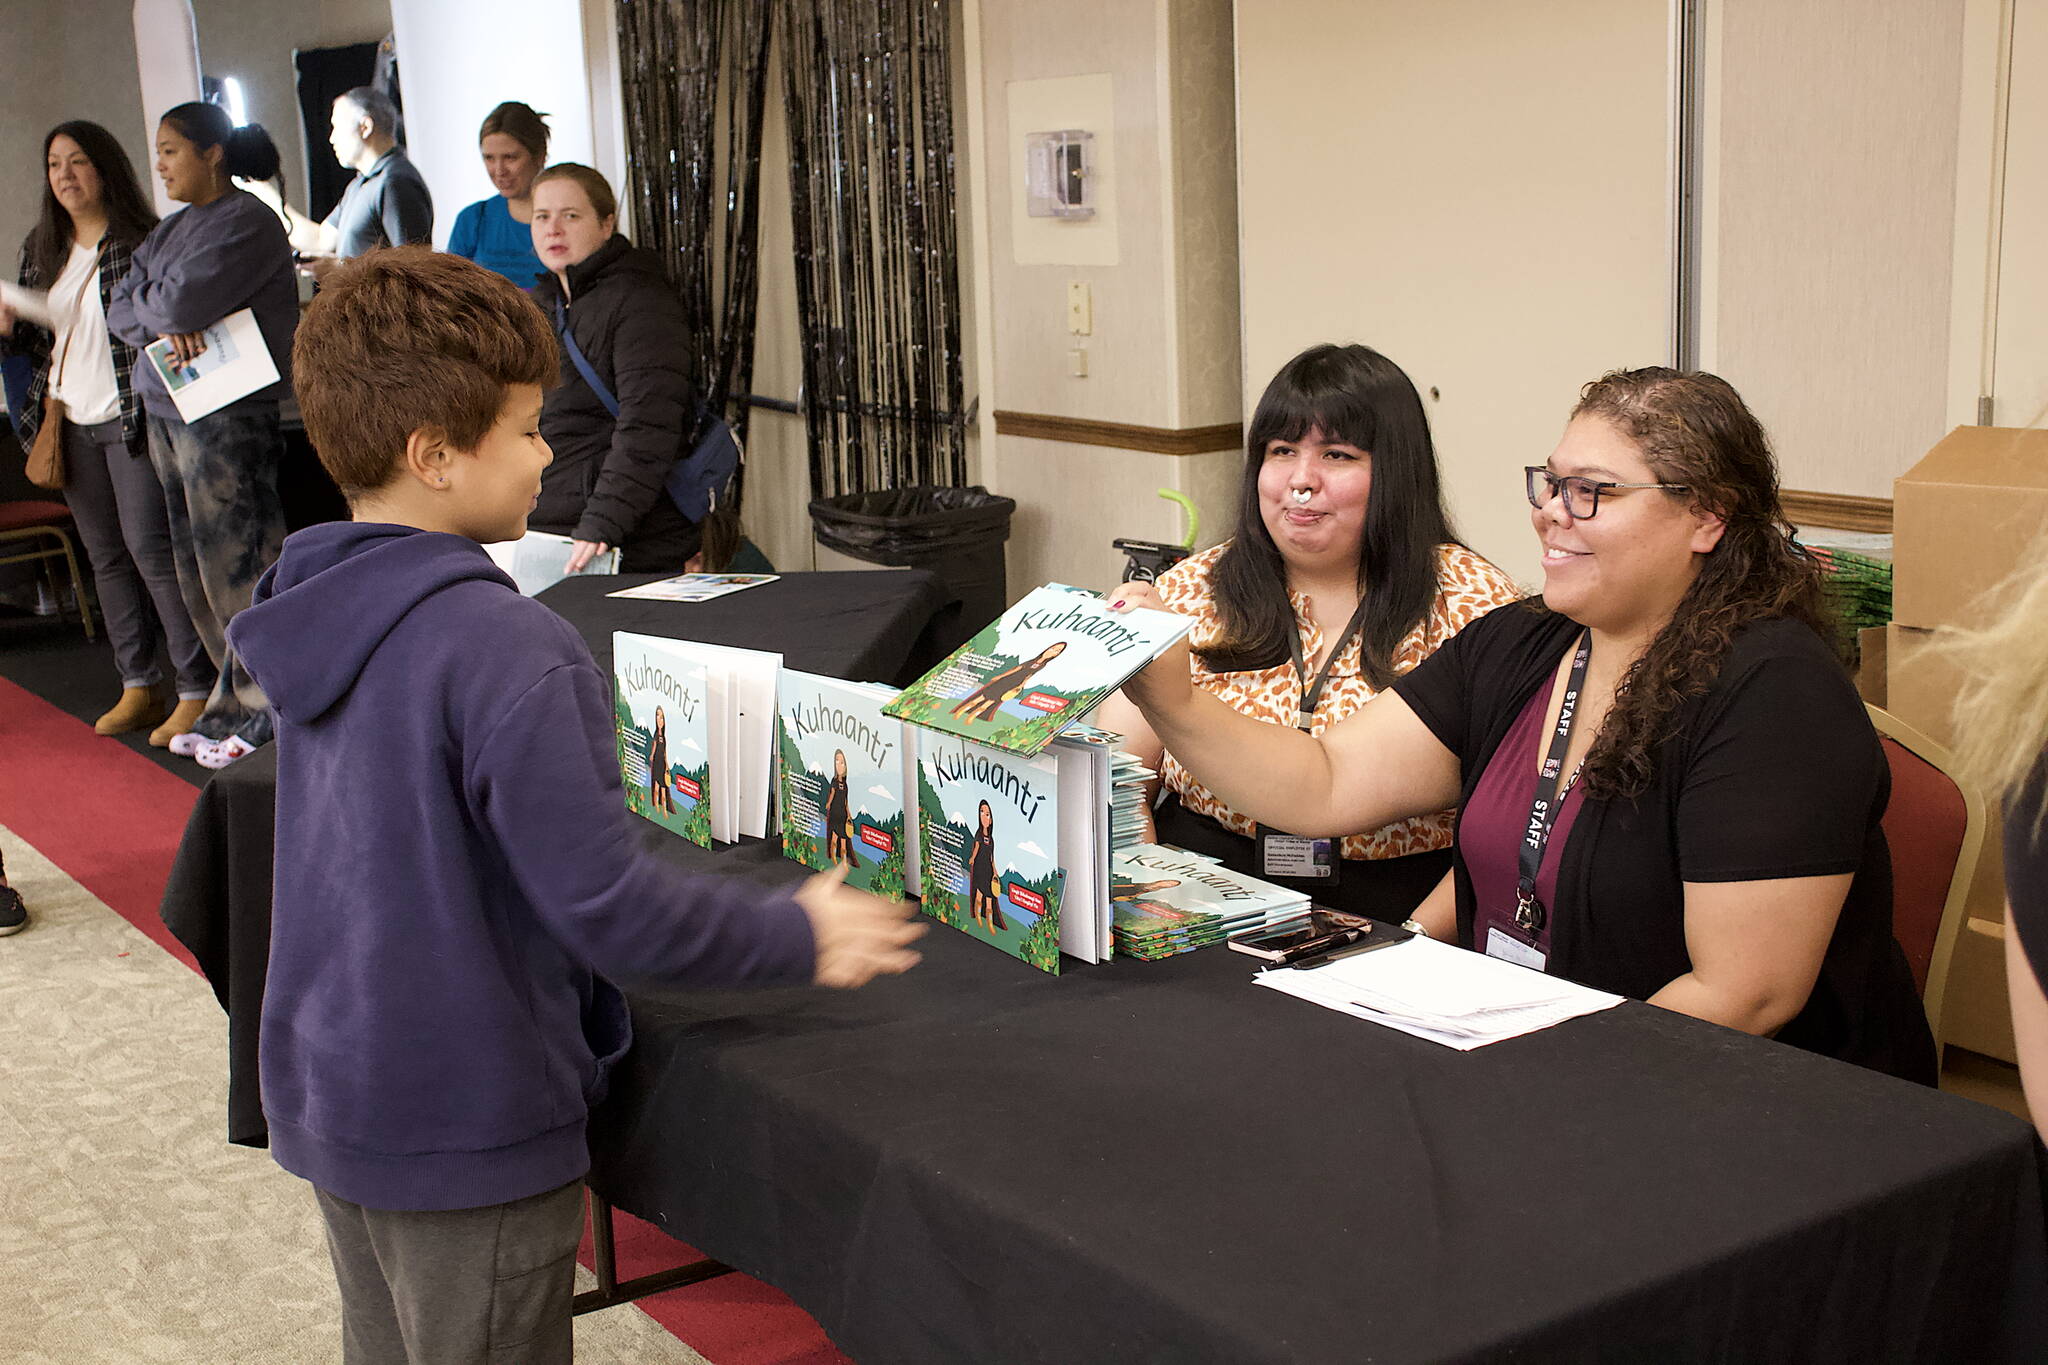 Felicia Price, an employee of the Central Council of Tlingit and Haida Indian Tribes of Alaska, hands a copy of the Lingít-language book “Kuhaantí” to her son, Brayden, 8, while staffing the distribution table for the book with co-worker Genevieve McFadden during its release party Friday night at Elizabeth Peratrovich Hall. (Mark Sabbatini / Juneau Empire)